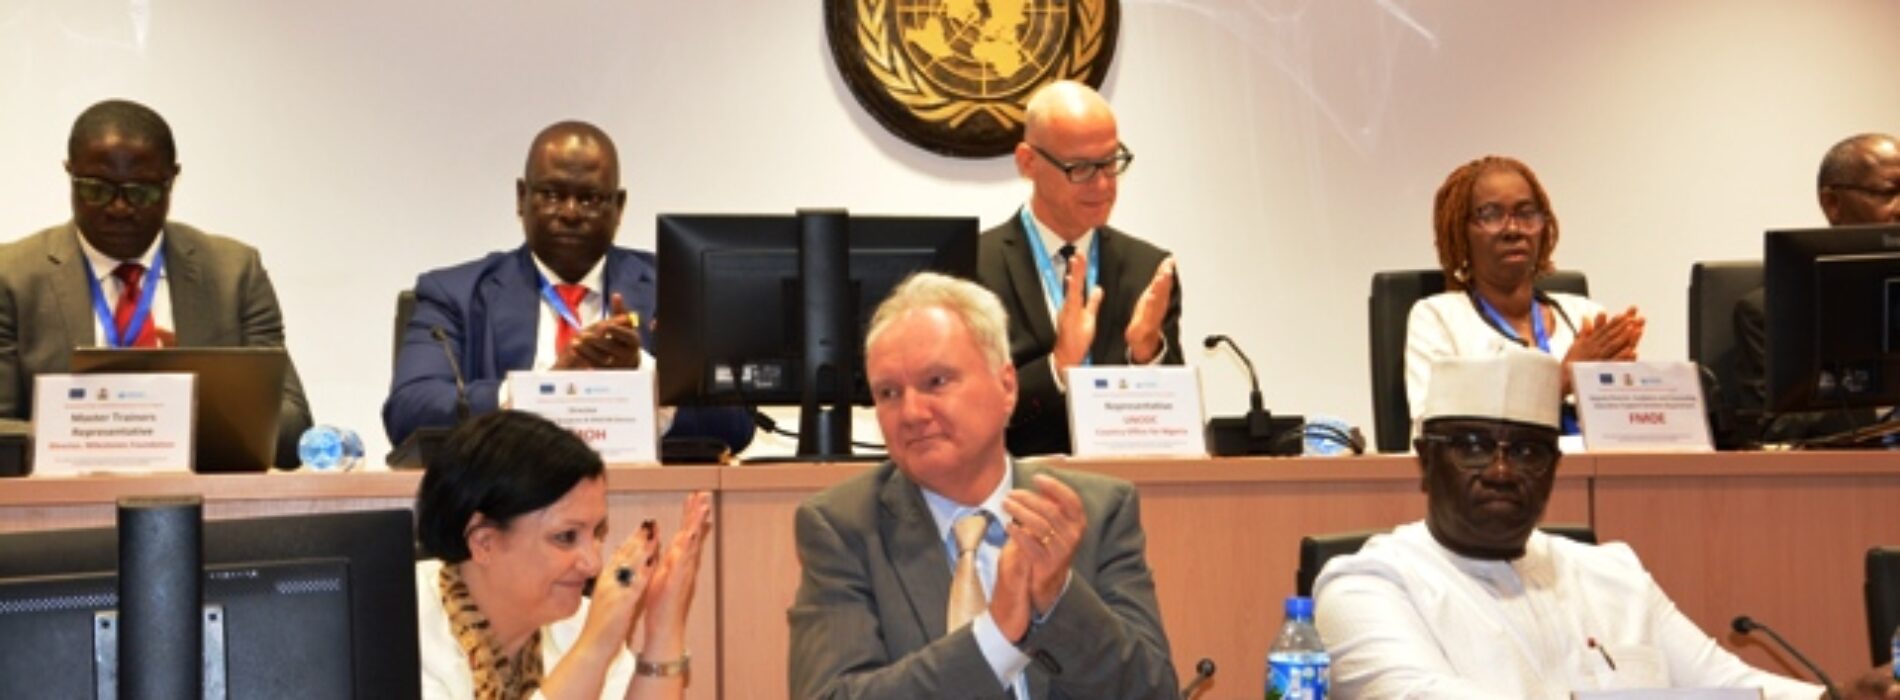 <strong>Nigeria-EU-UNODC Partnership Project on Drug Control closes</strong>